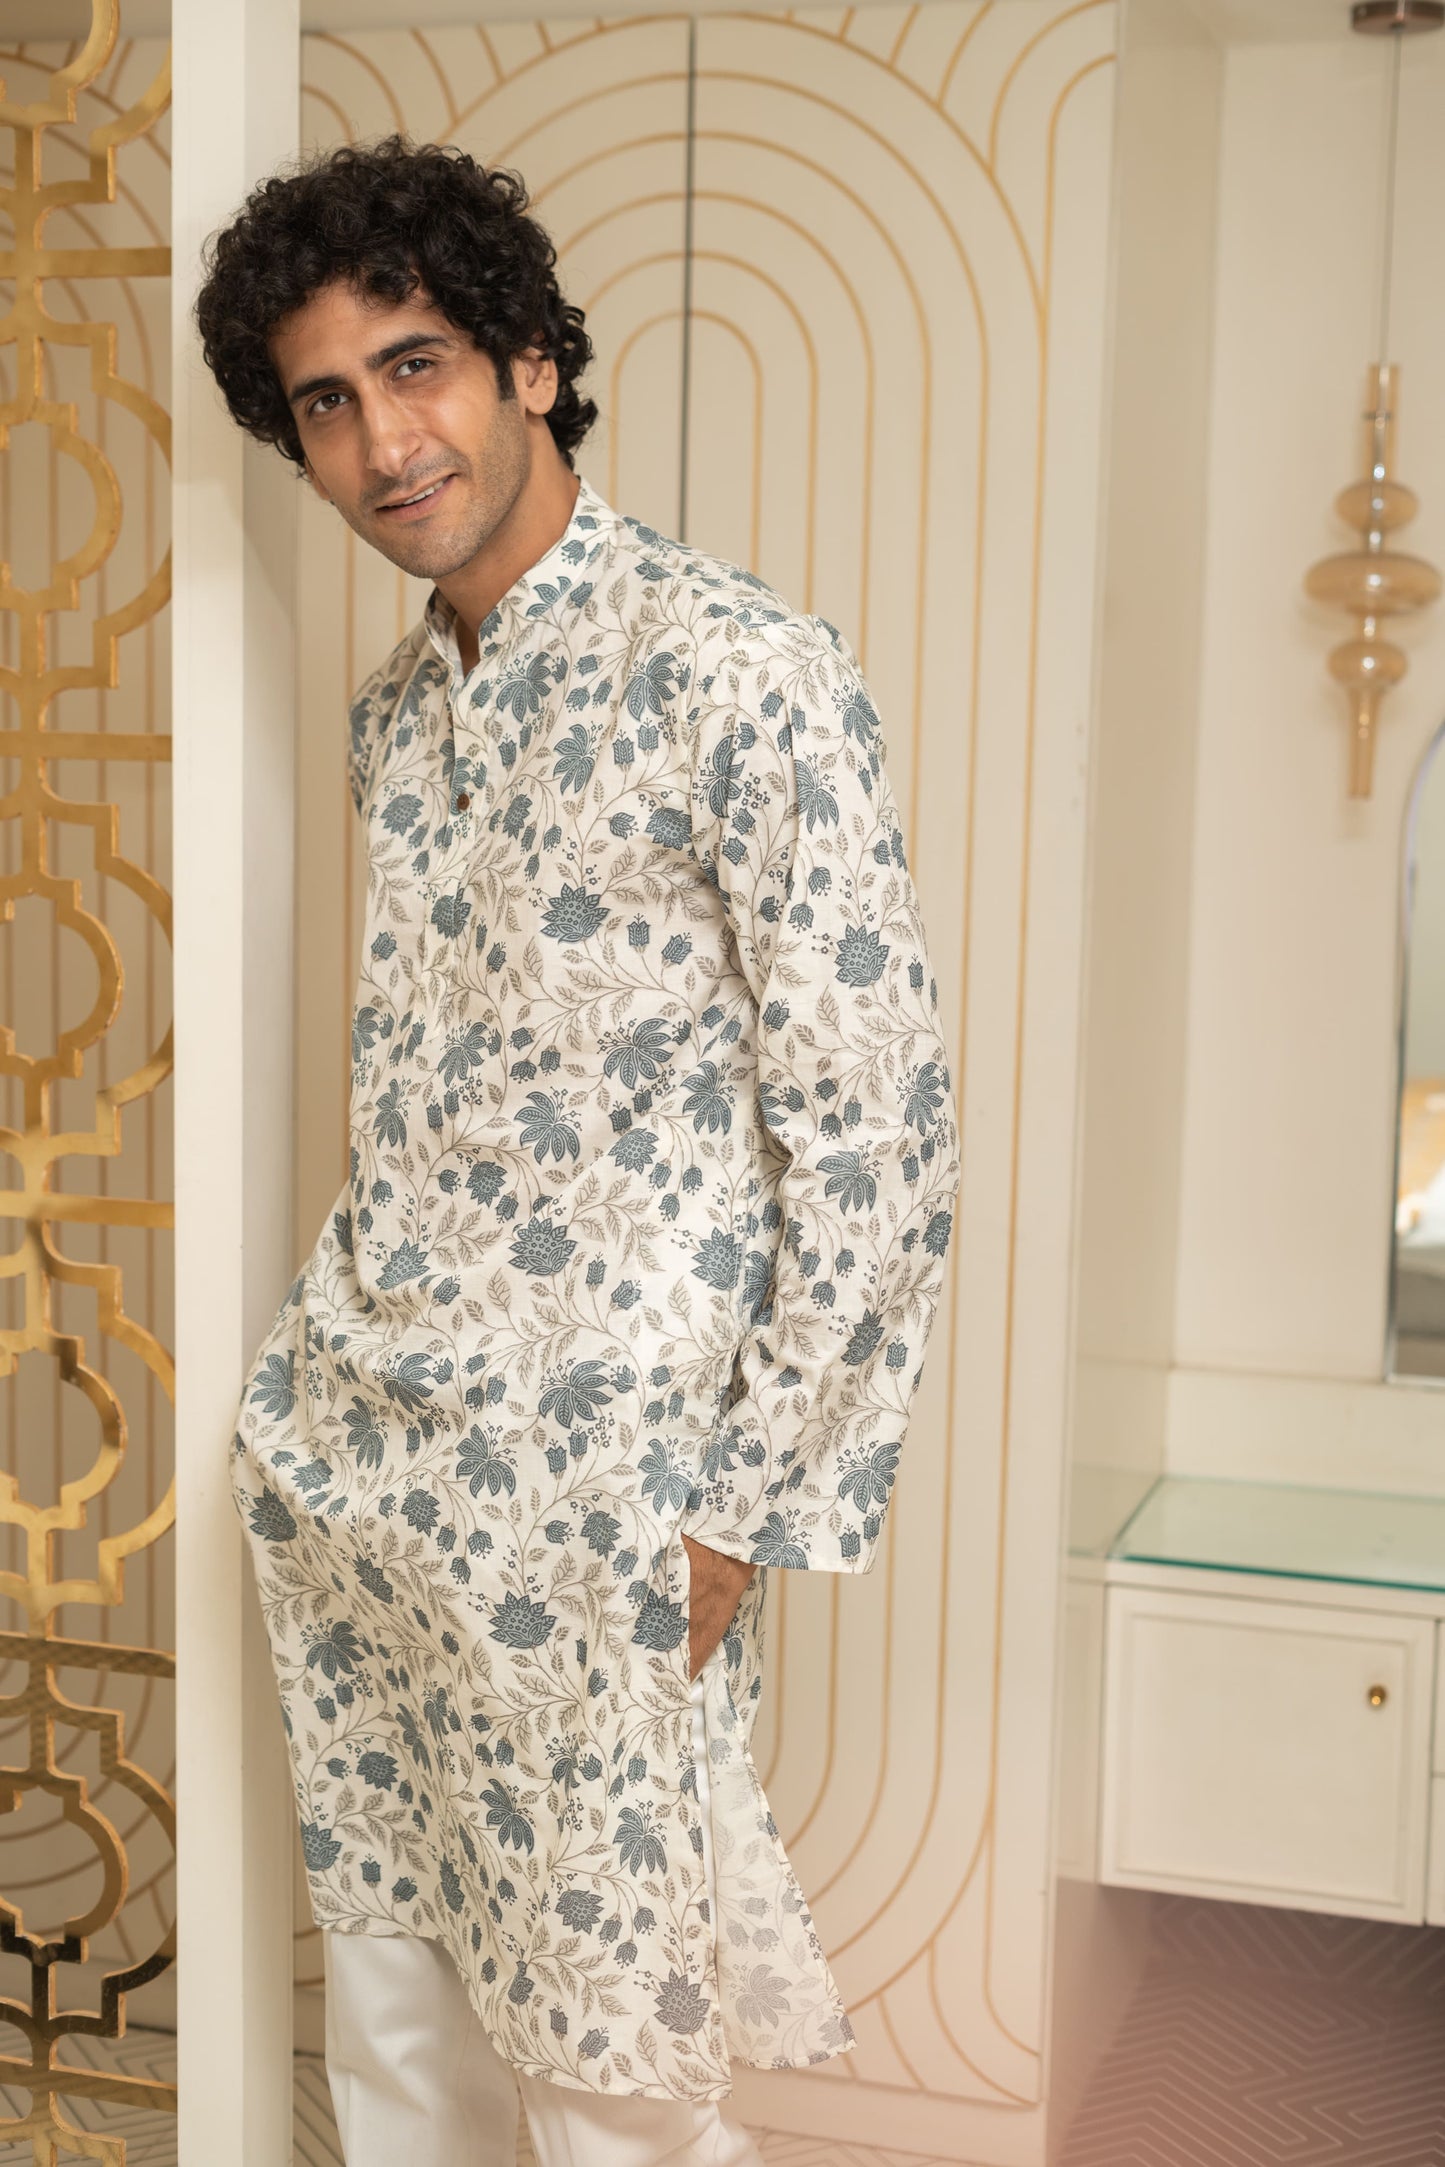 The White Long Kurta With All-Over Floral Print